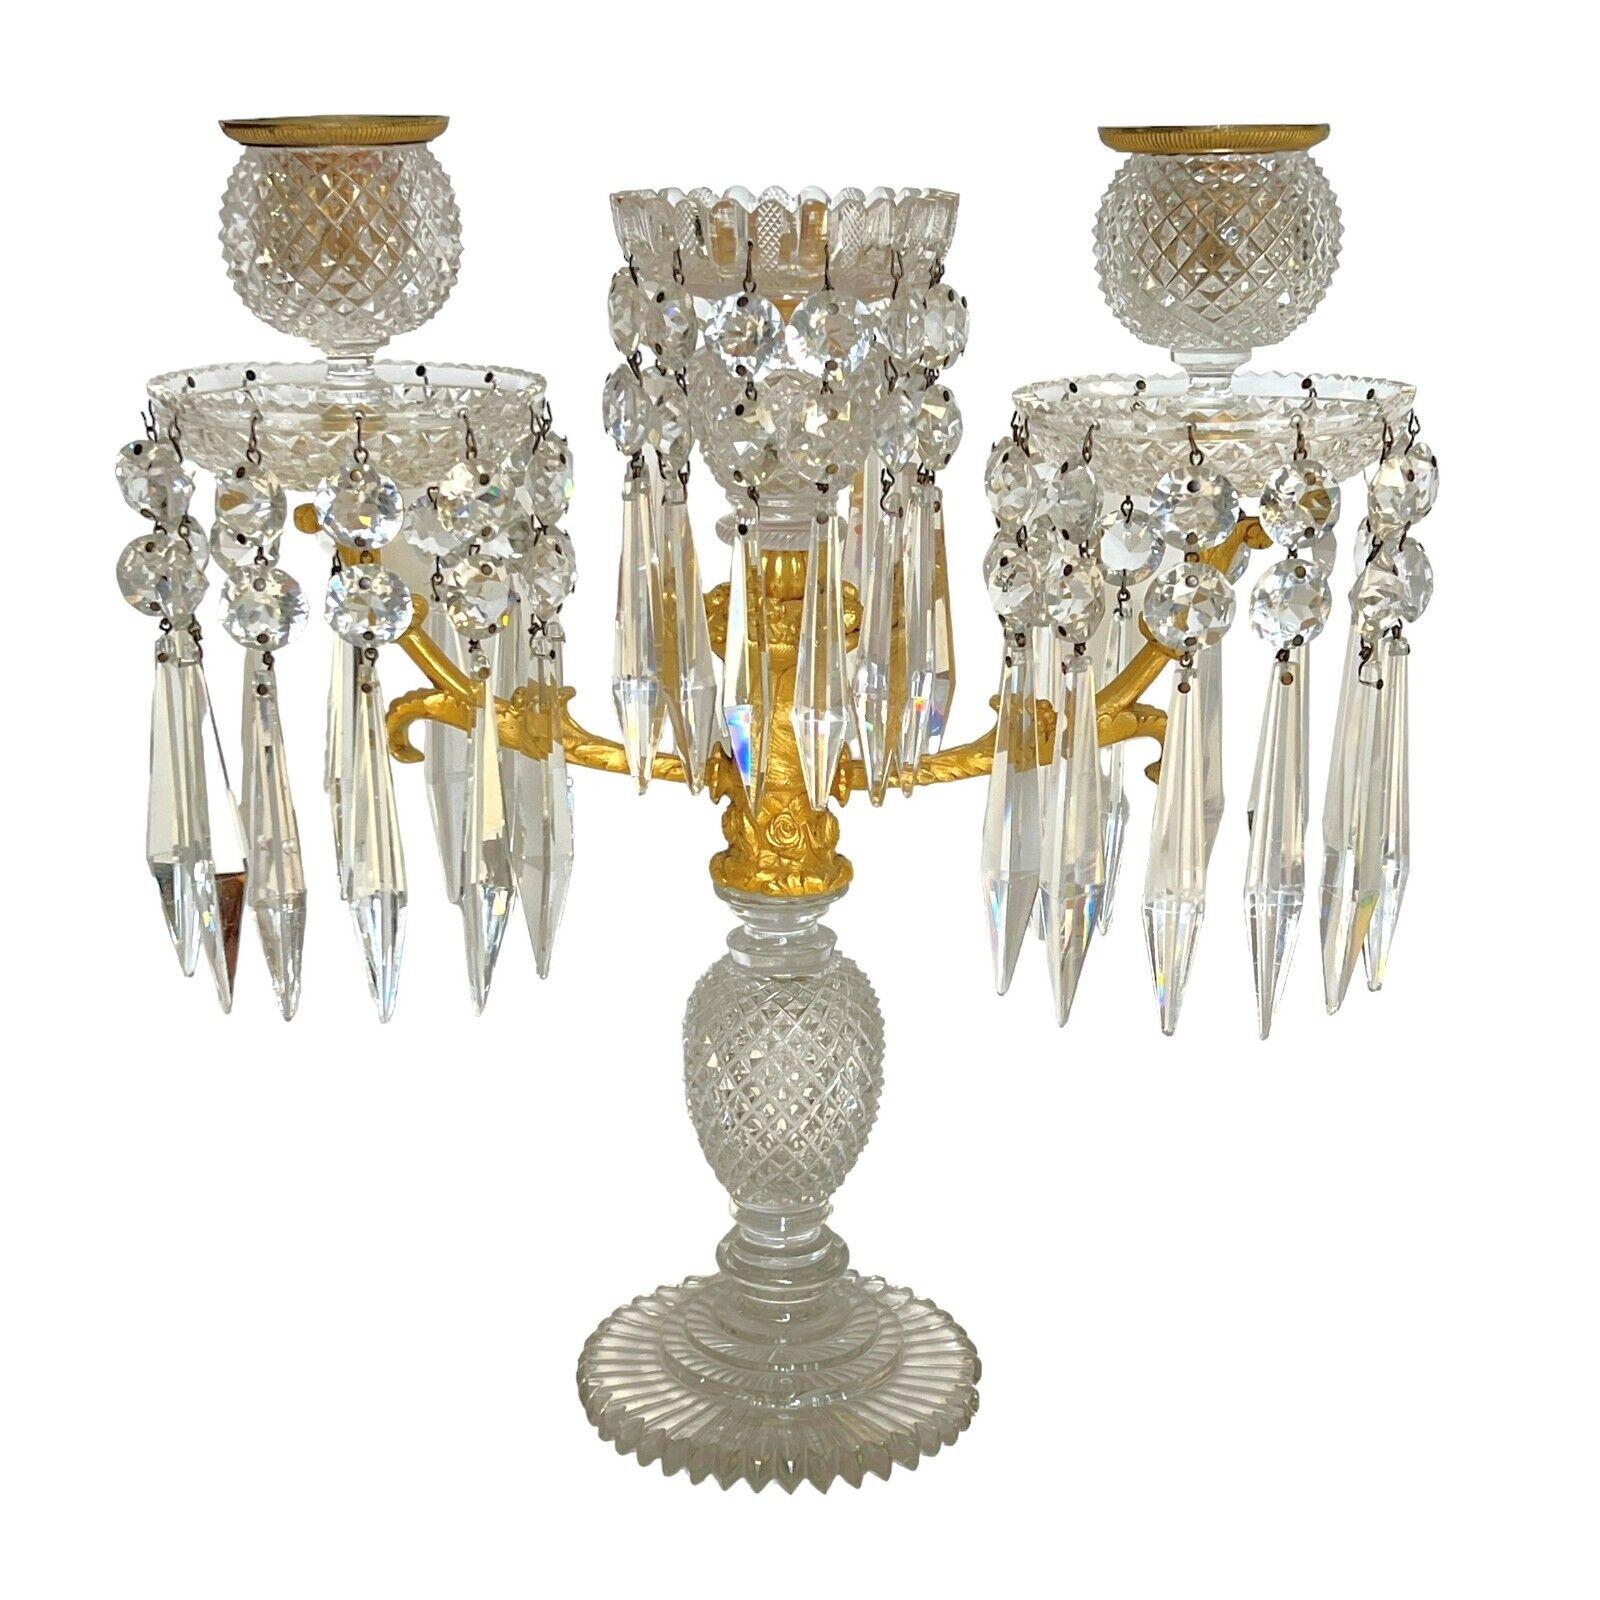 A Pair Of English Regency Ormolu and Cut Glass Candelabra, attributed to Blades In Good Condition For Sale In New York, NY